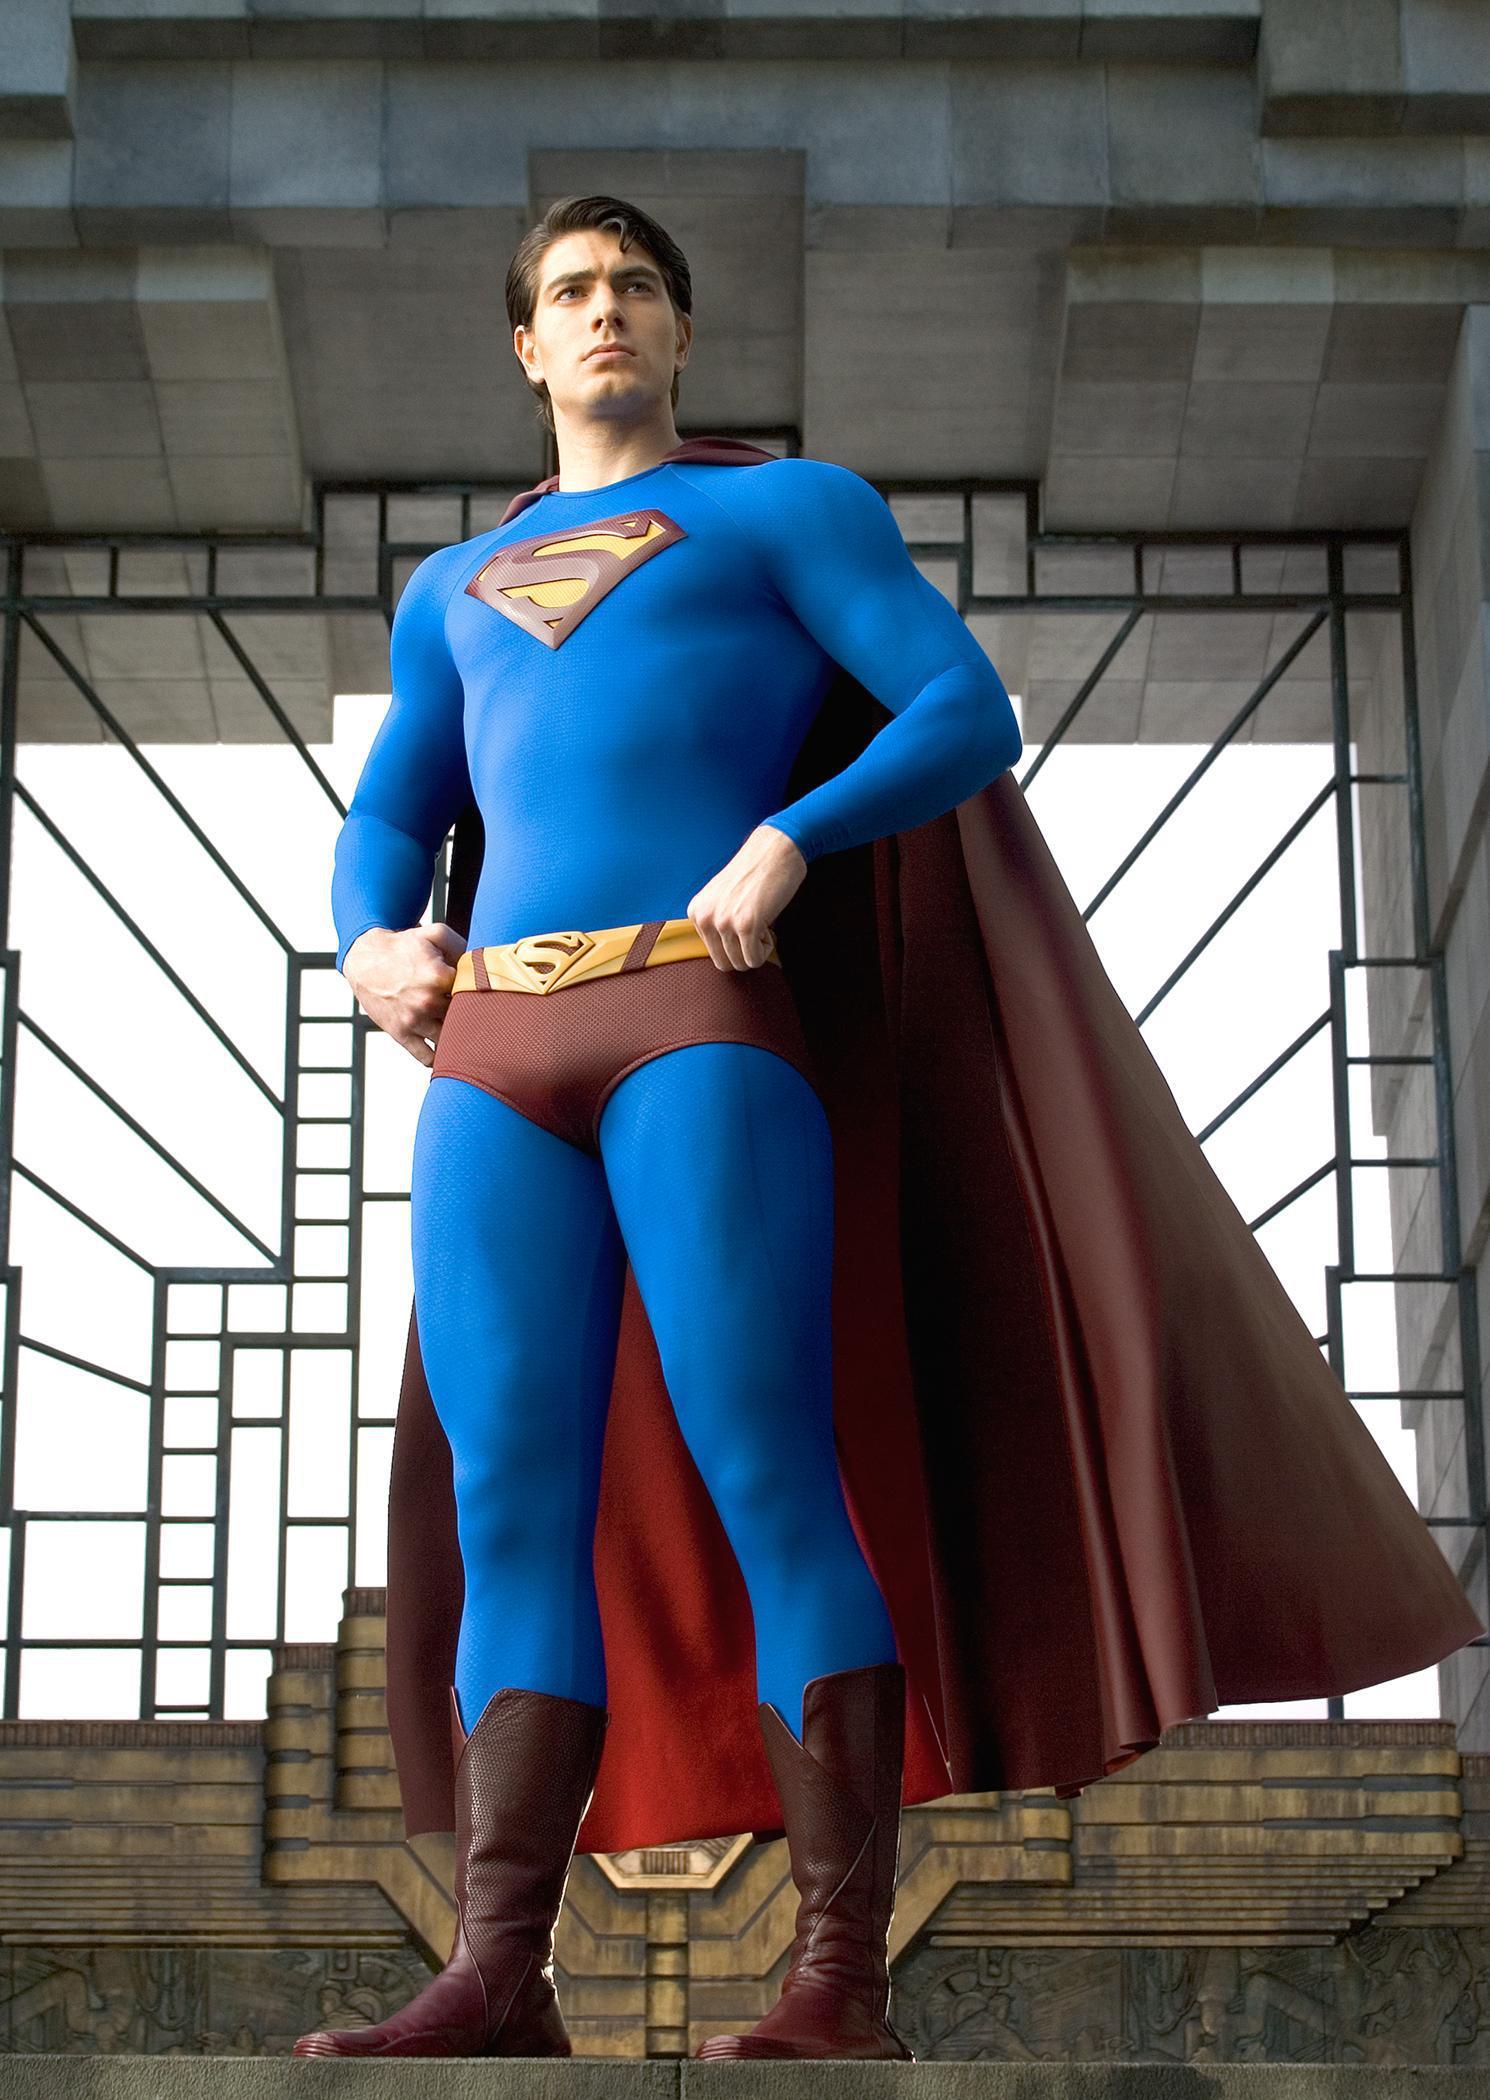 Brandon Routh Wallpaper Image Photo Picture Background